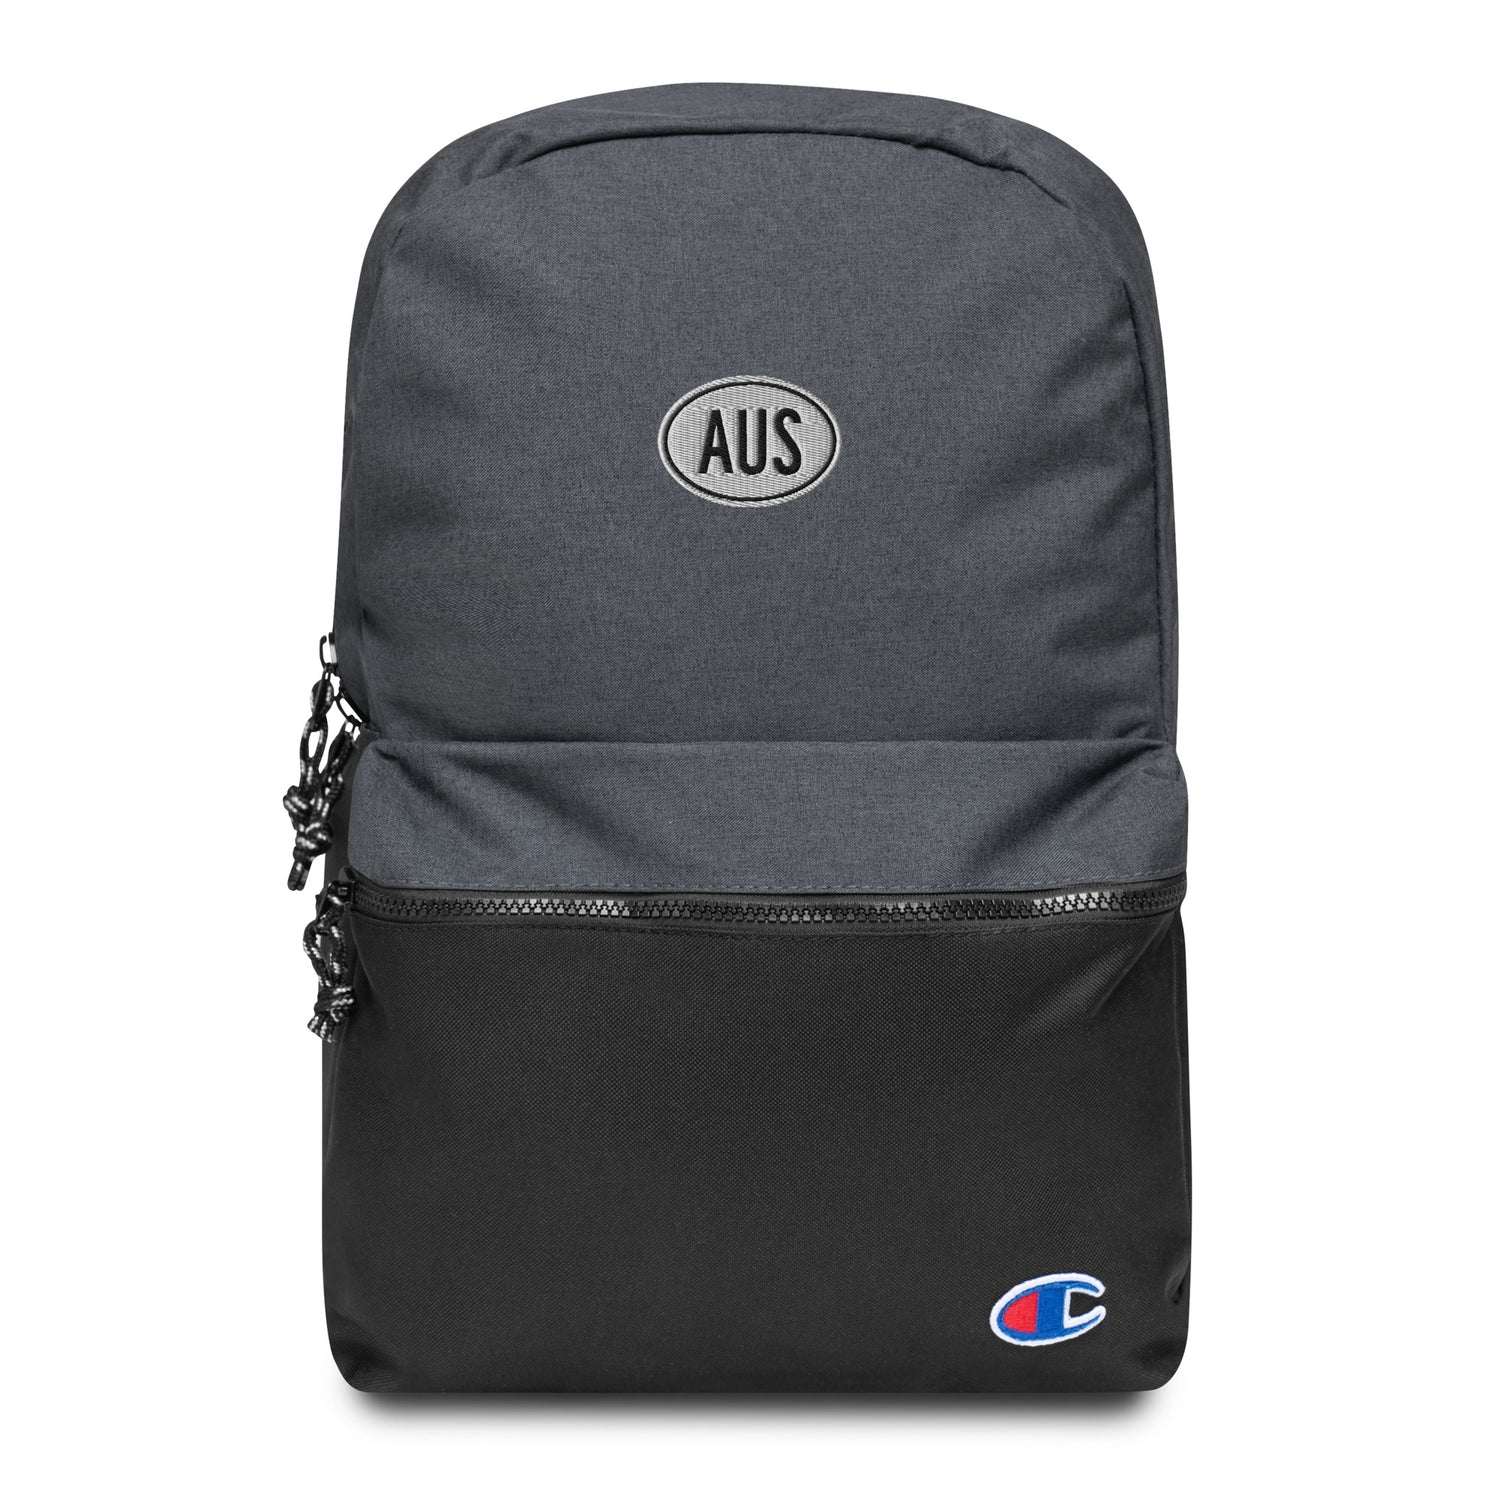 Austin Texas Backpacks, Fanny Packs and Tote Bags • AUS Airport Code